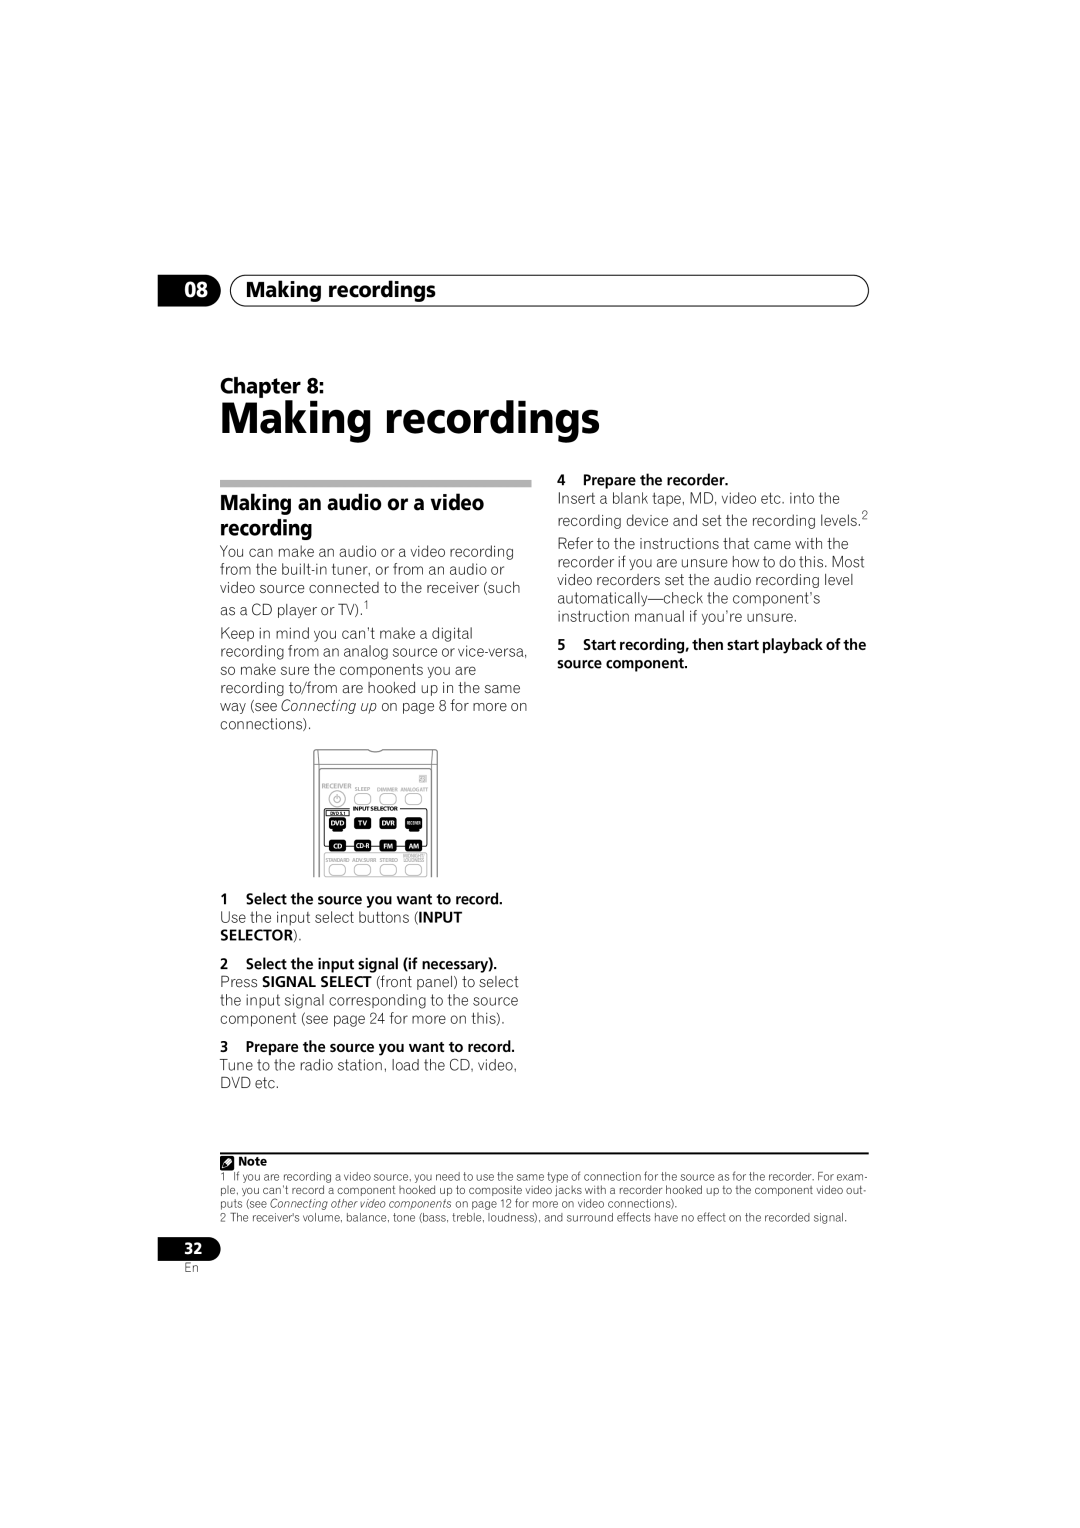 Pioneer VSX-516 operating instructions 08Making recordings Chapter, Making an audio or a video recording 